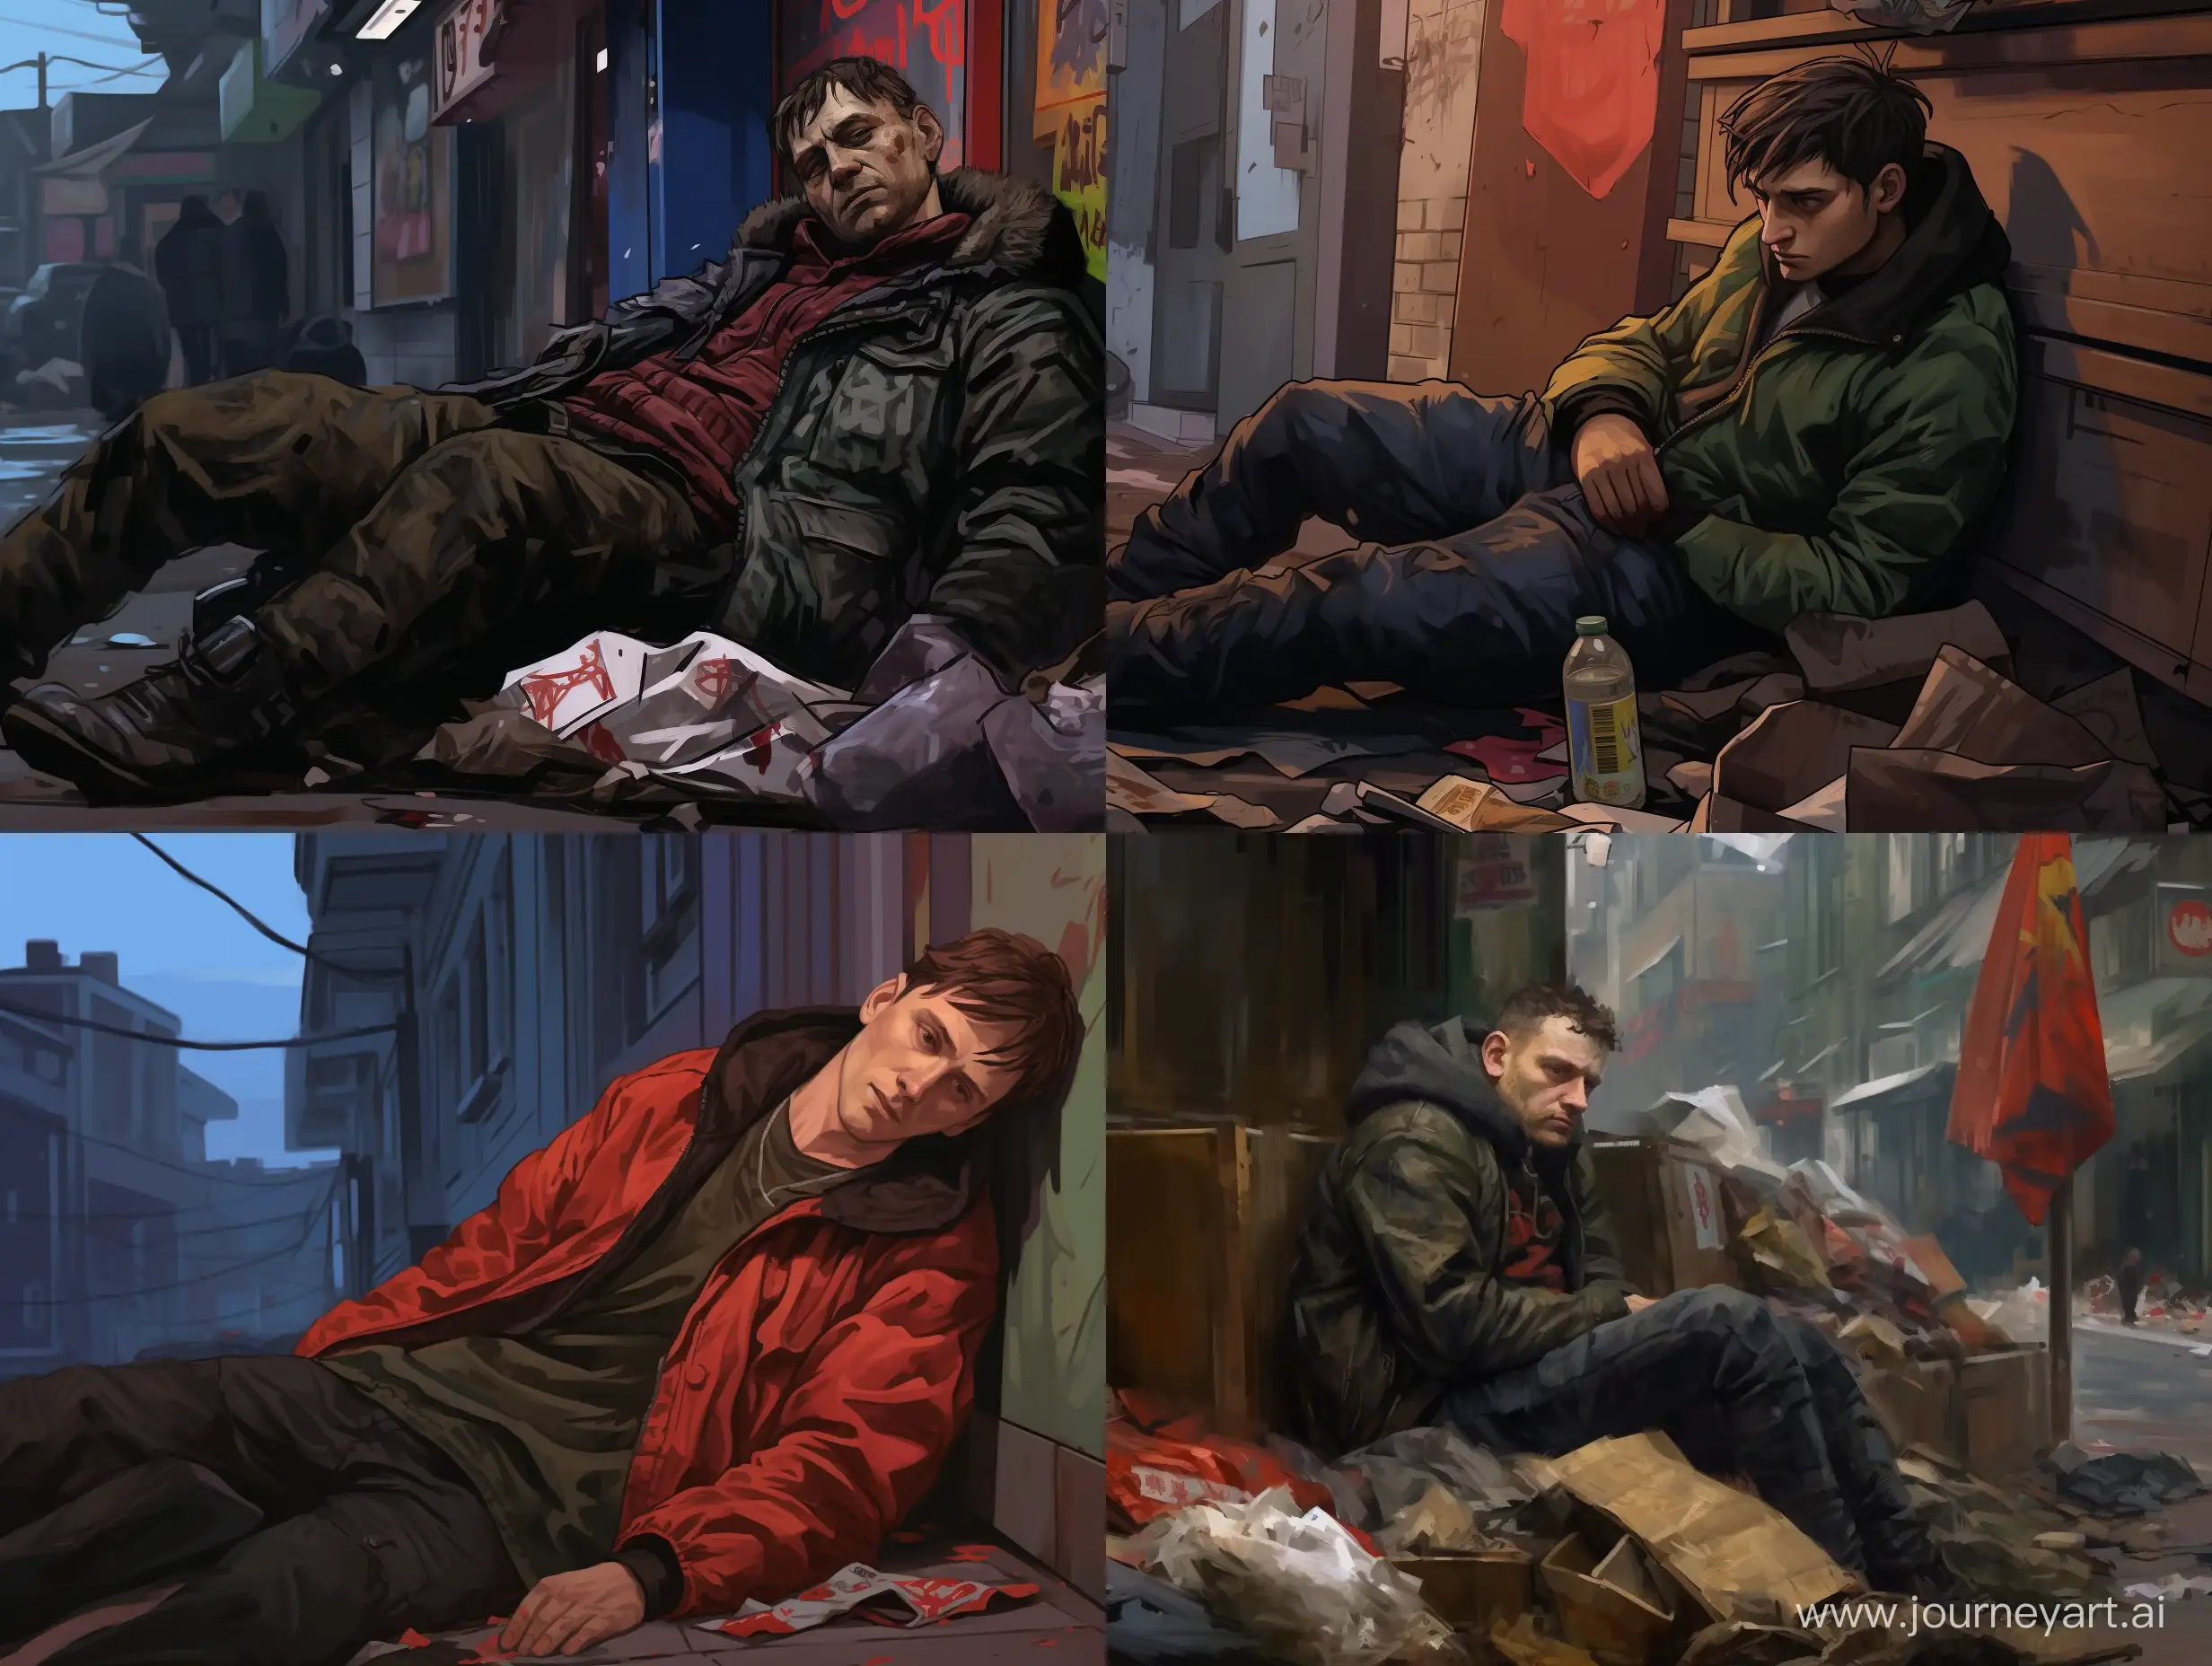 A Russian gopnik fell on homeless people from a dumpster